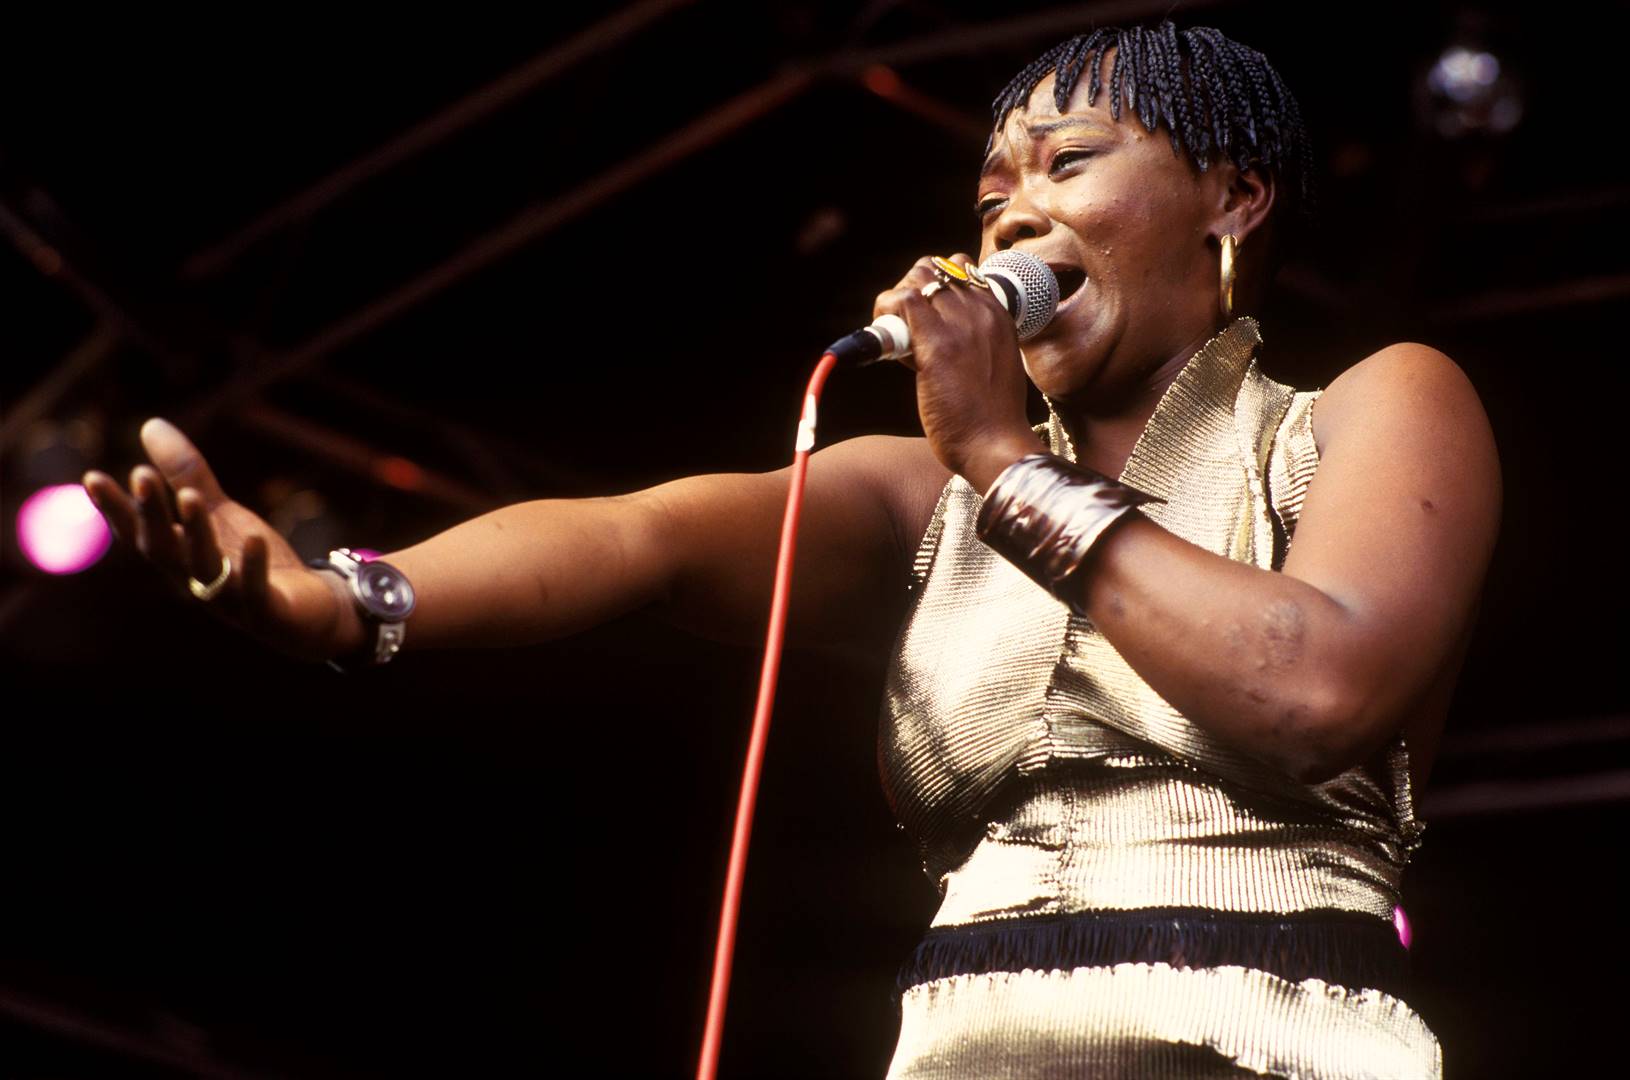 Brenda Fassie was a force of nature when she performed live on stage. Photo: Leon Morris / Redferns